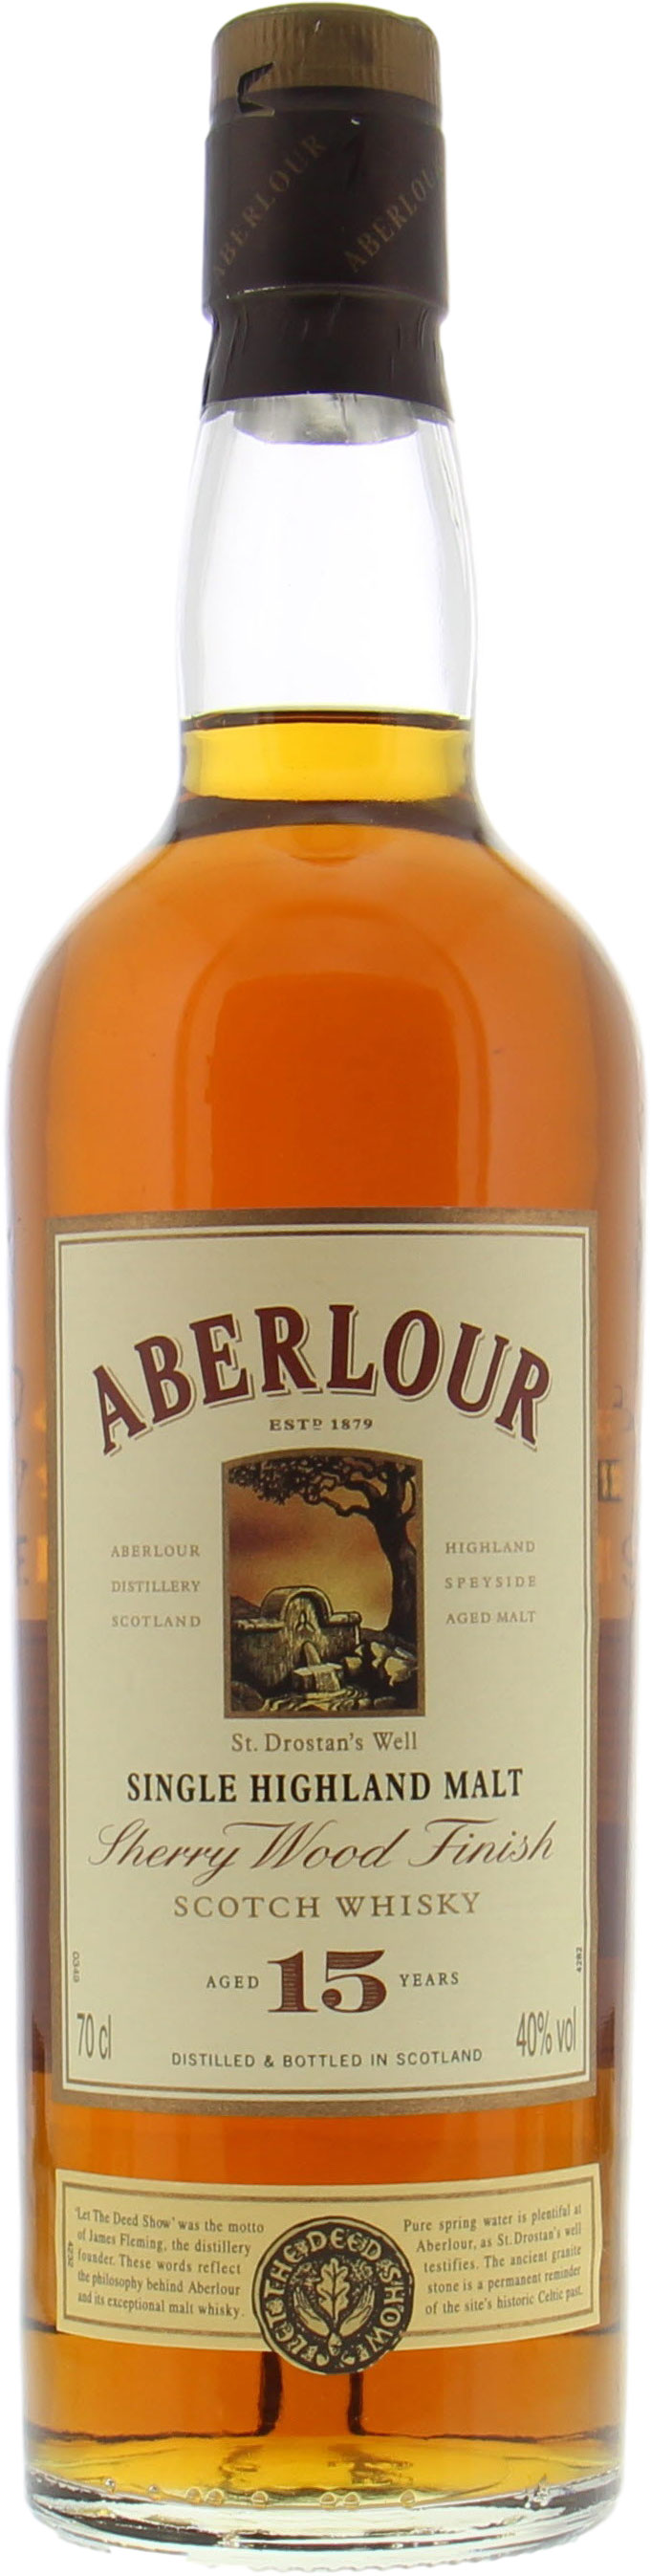 Aberlour - 15 Years Old Sherry Wood Finish 40% NV No Original Box Included